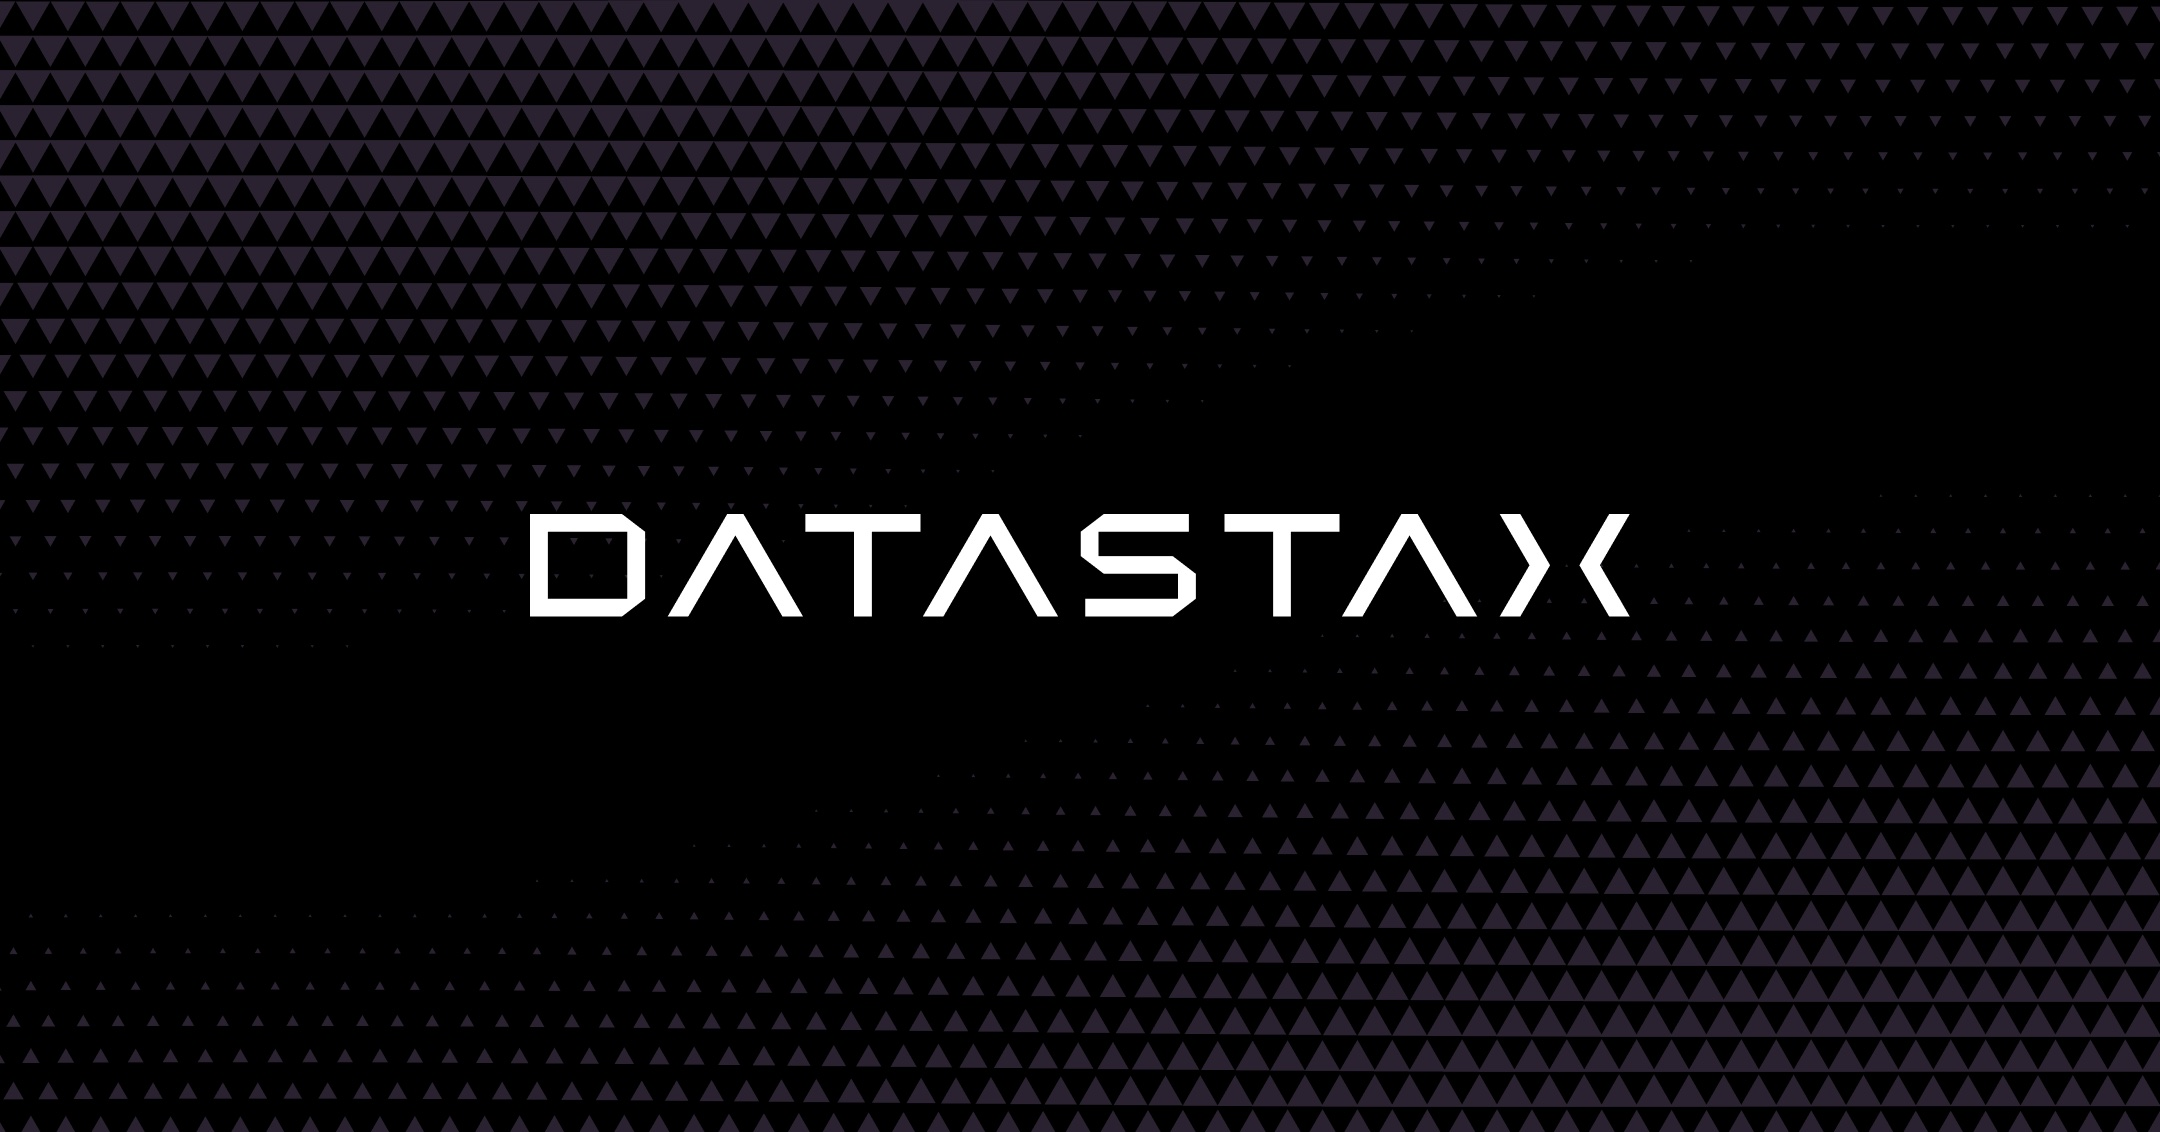 Solution Brief: Modernize Data to Scale AI in Hybrid Cloud with IBM CloudPak for Data and DataStax Enterprise